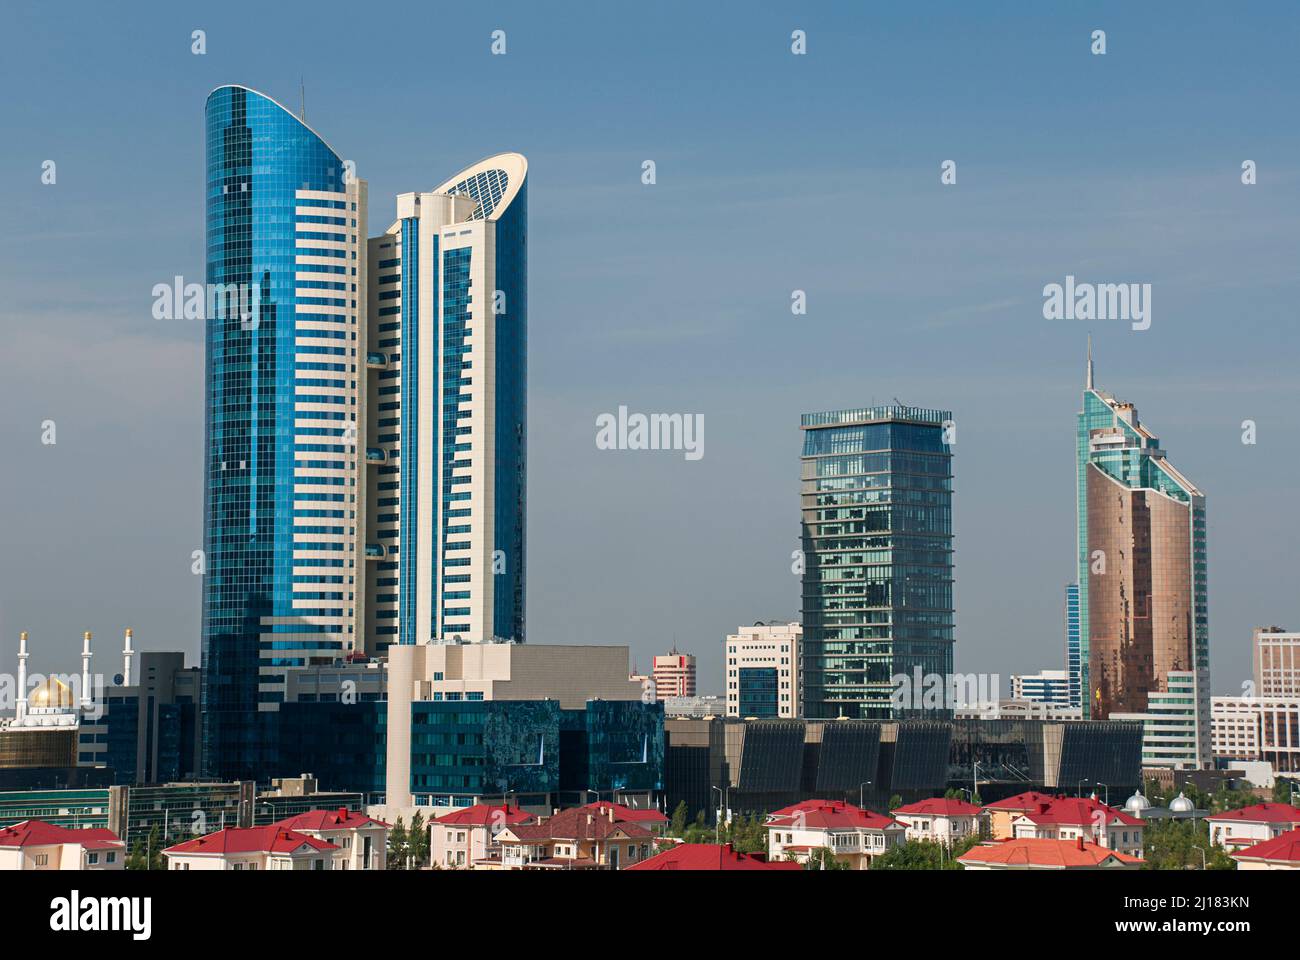 Cityscape of Astana, the capital of Kazakhstan, with modern skyscrapers. Stock Photo